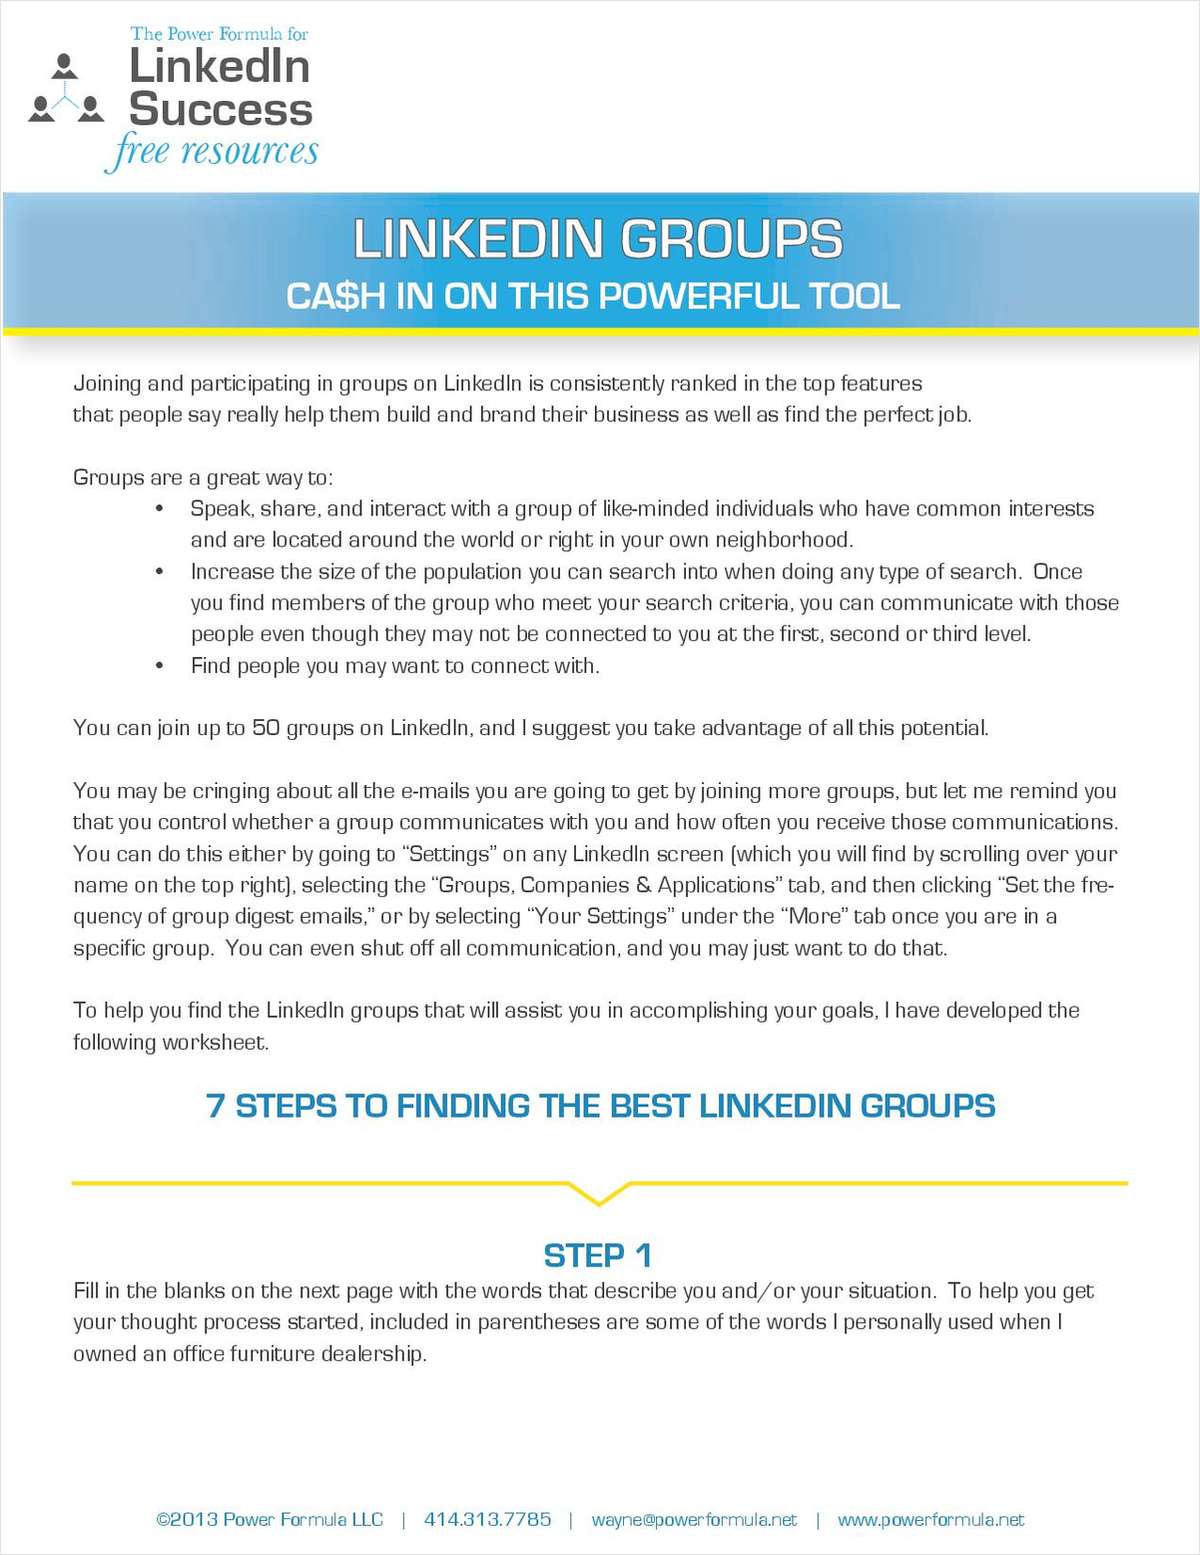 LinkedIn Groups: Cash in on this powerful tool